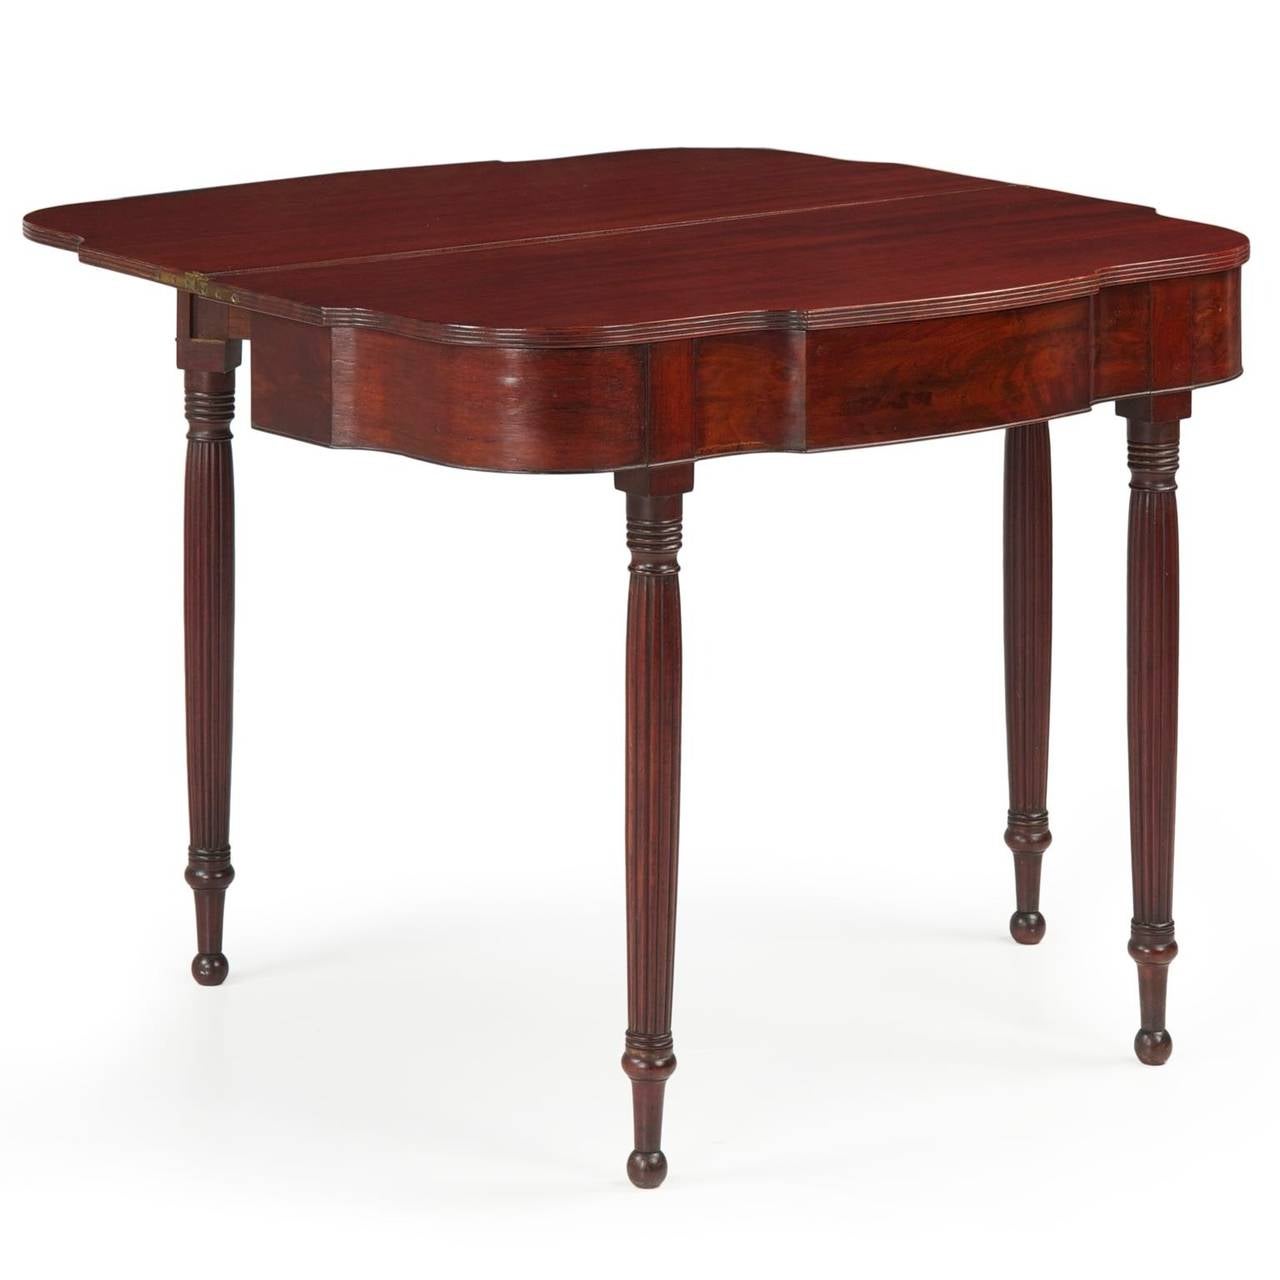 The austerity of the turned leg and lack of unnecessary embellishment is most effective in this fine pair of card tables.  Showcasing vibrant flamed mahogany veneers along the aprons, the form is quite complex with the concave-convex serpentine of